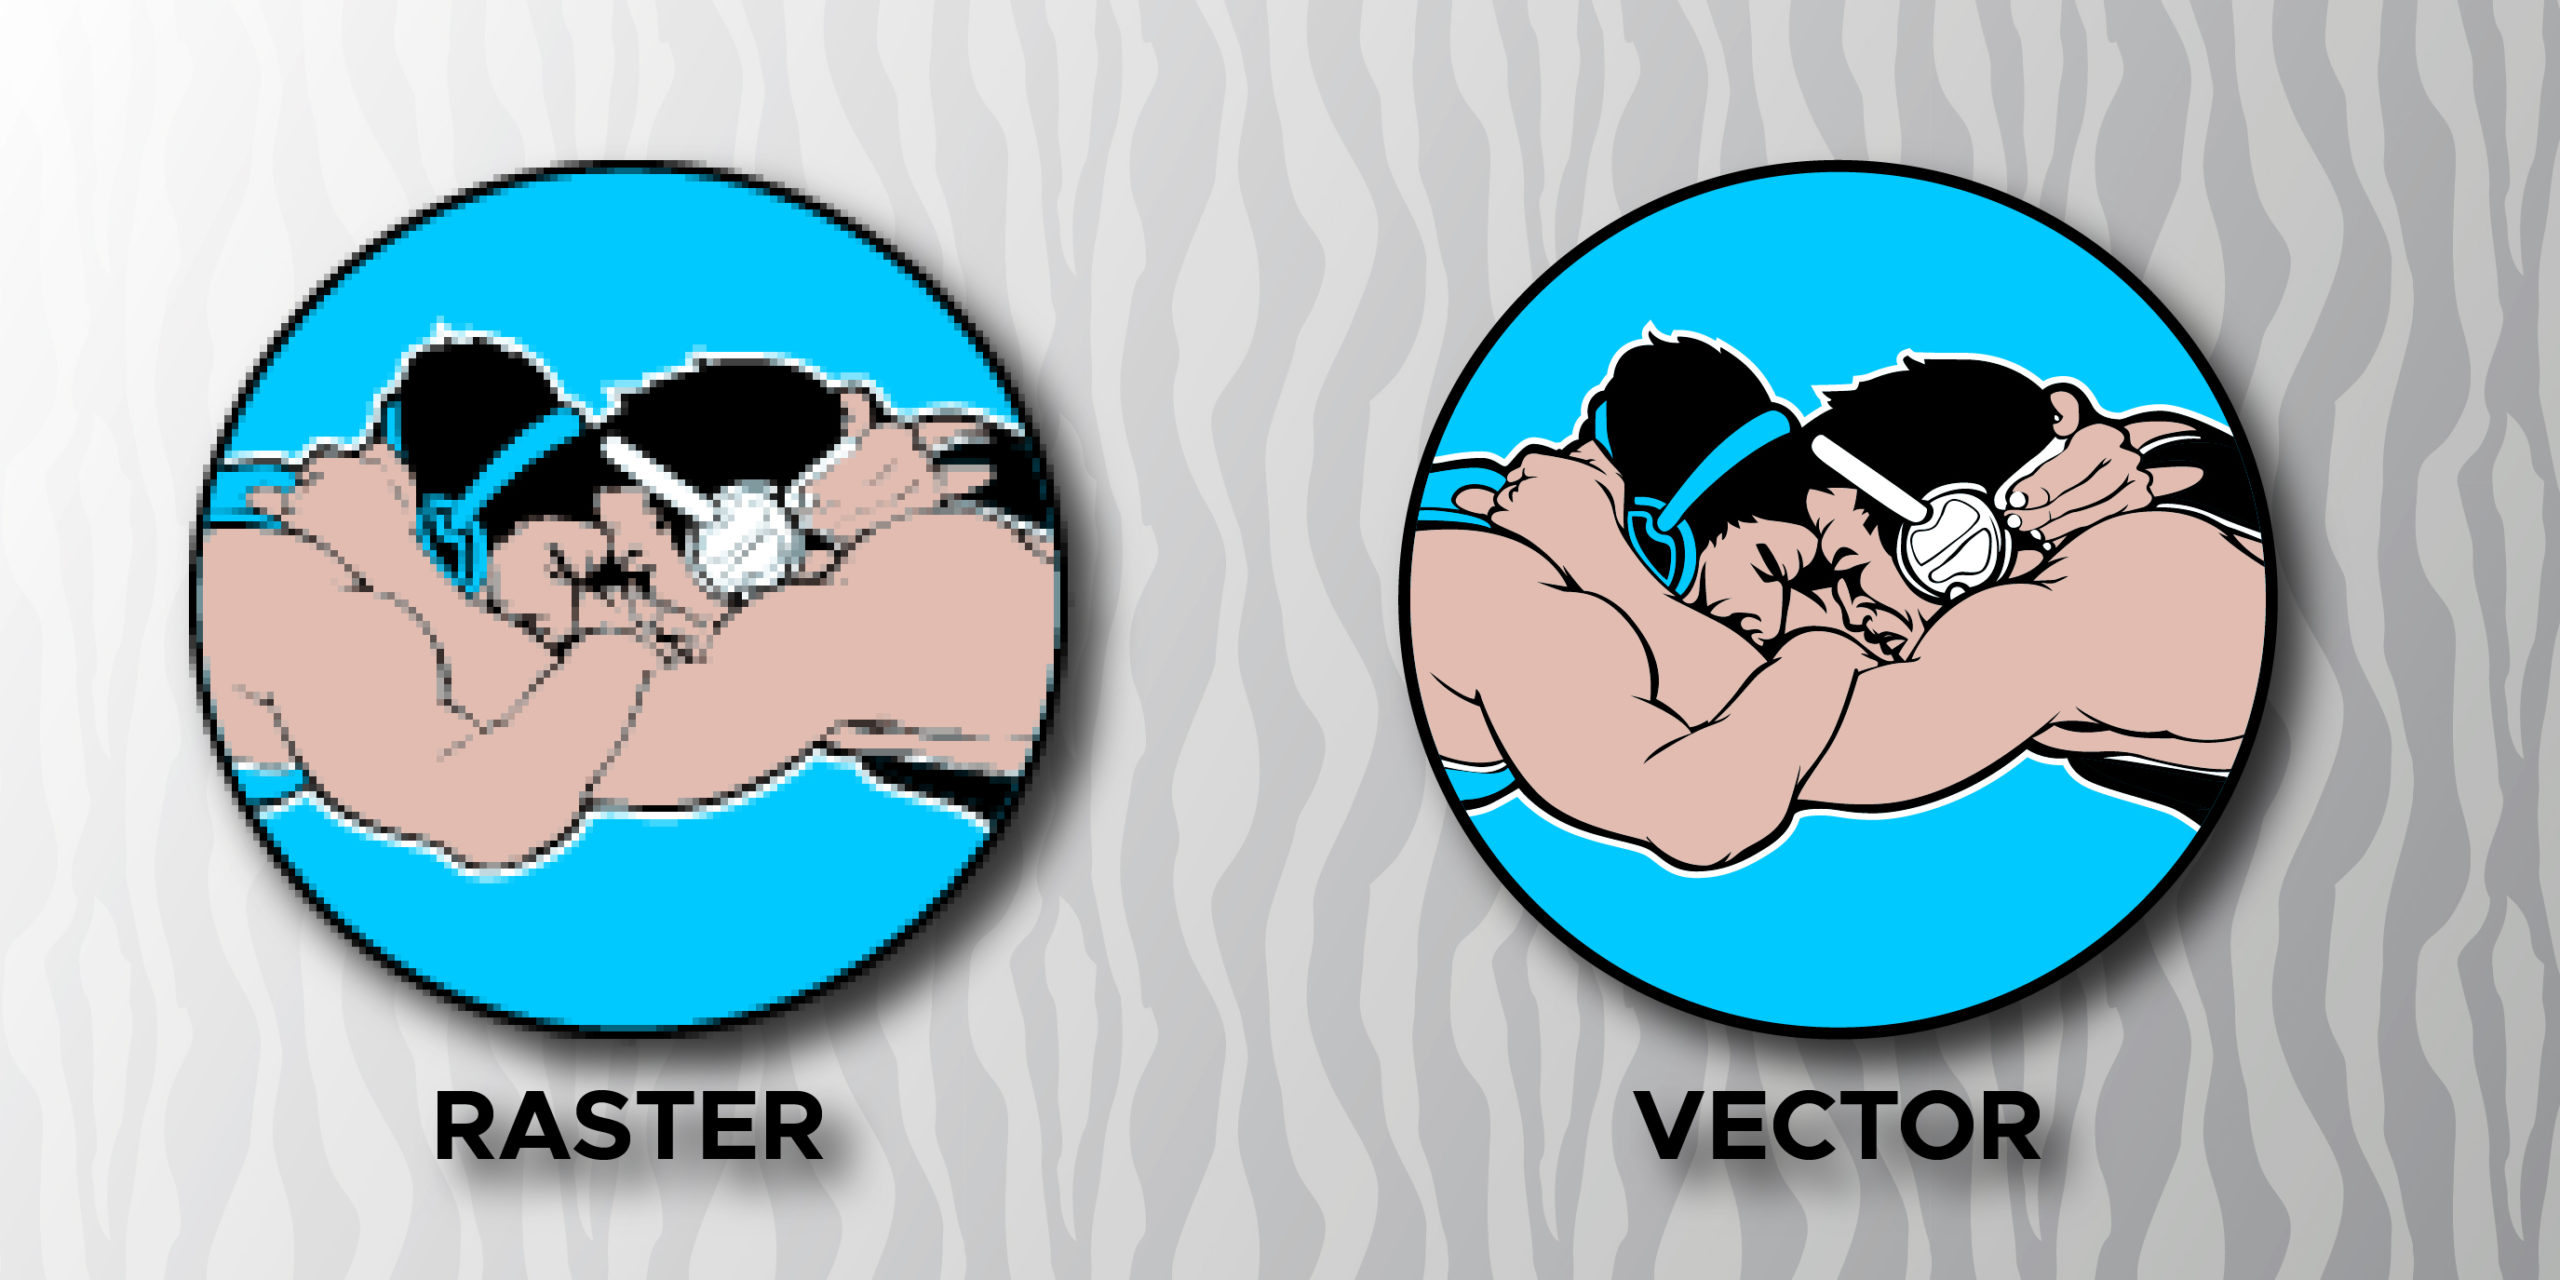 vector images